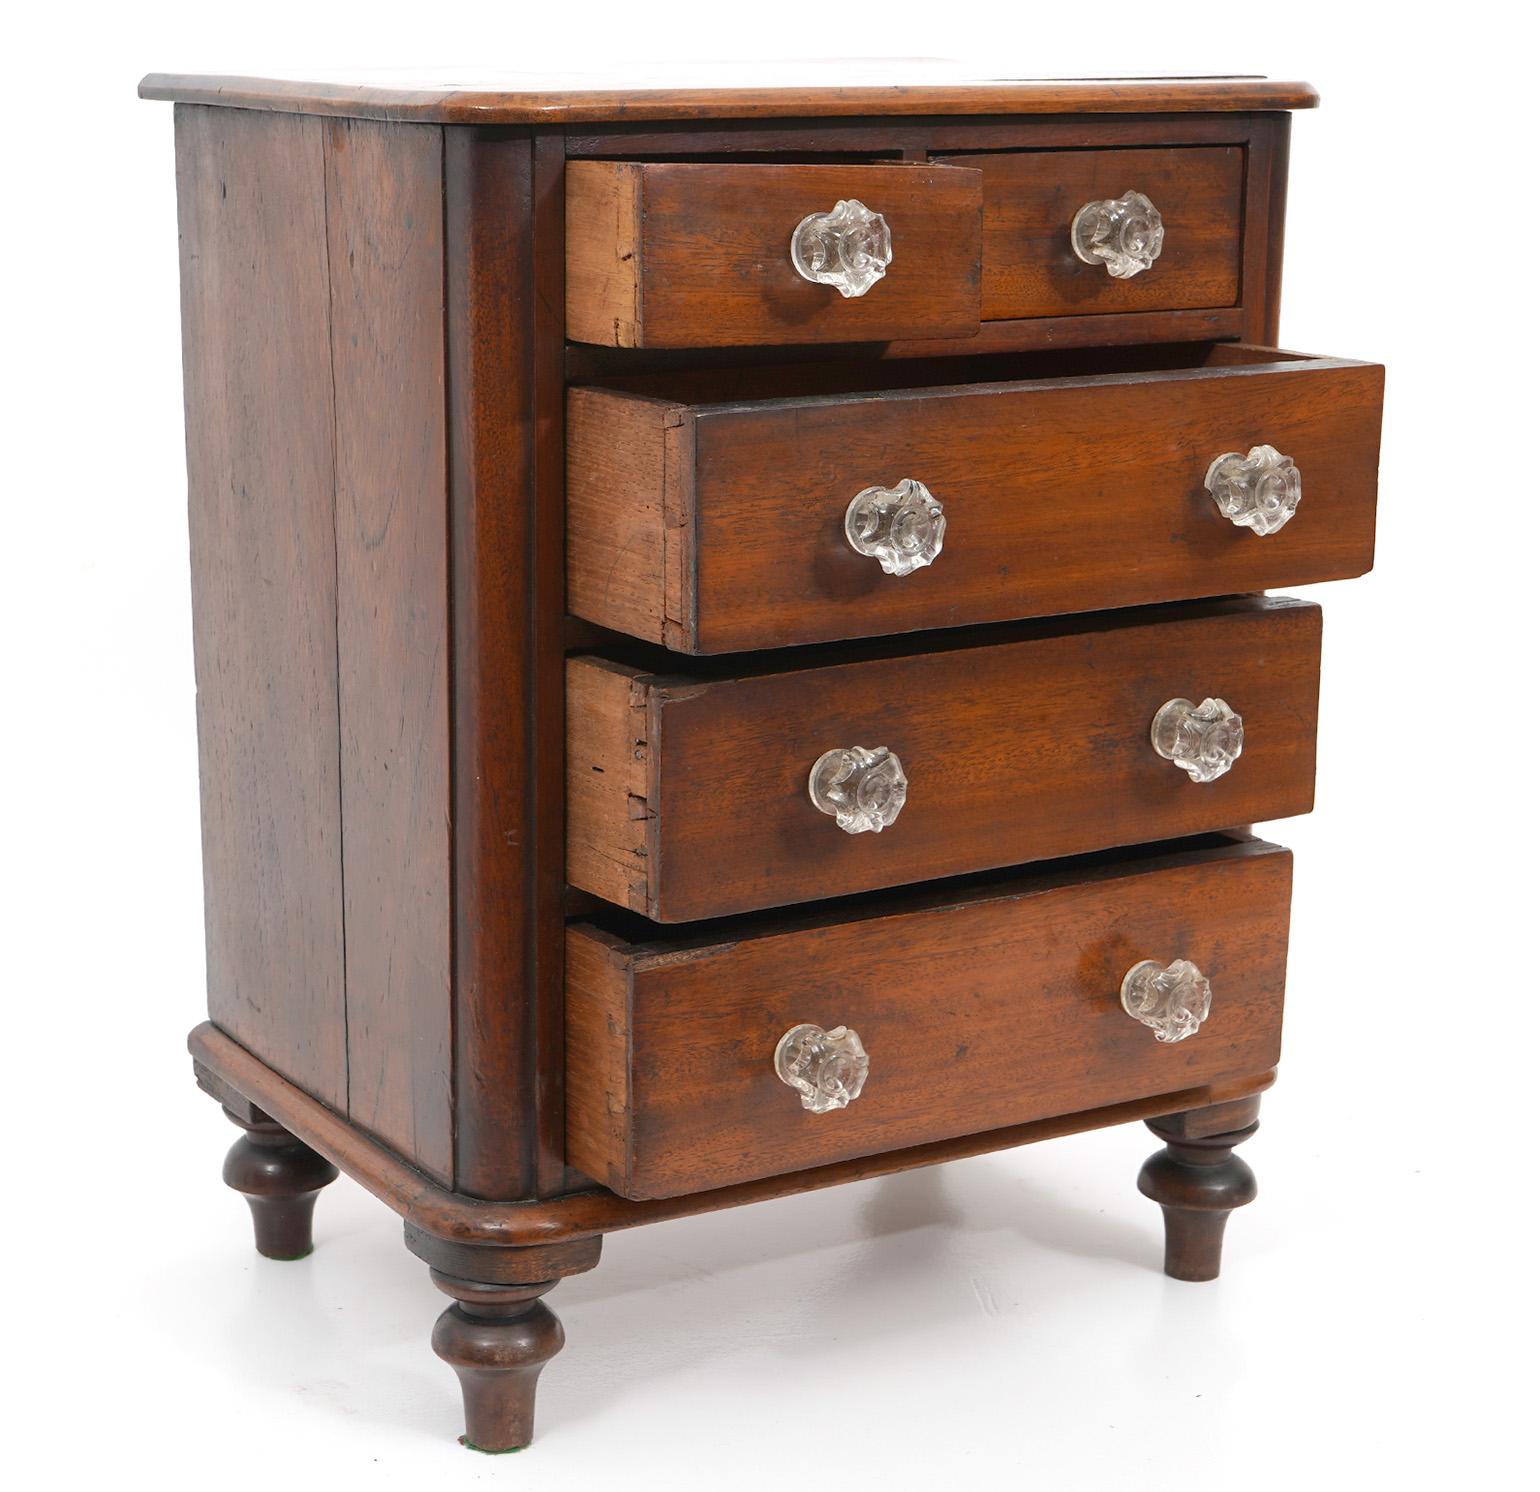 Antique Miniature English Mahogany Chest Sheraton Style Chest - Circa 1850's In Good Condition For Sale In Ft. Lauderdale, FL